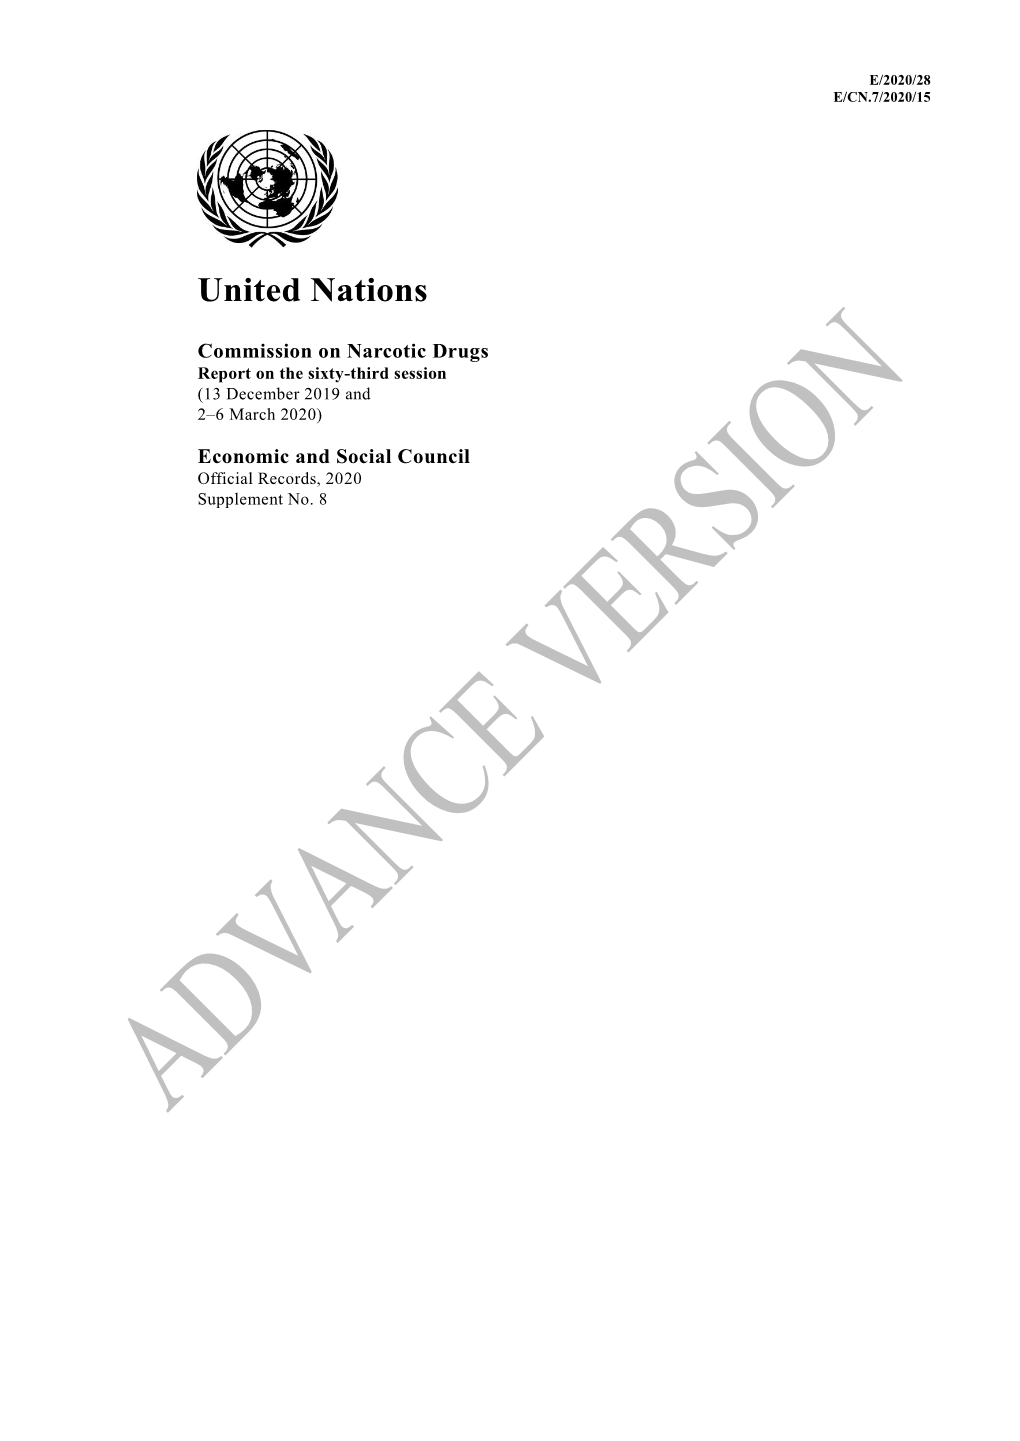 English Advance Version of the CND Report